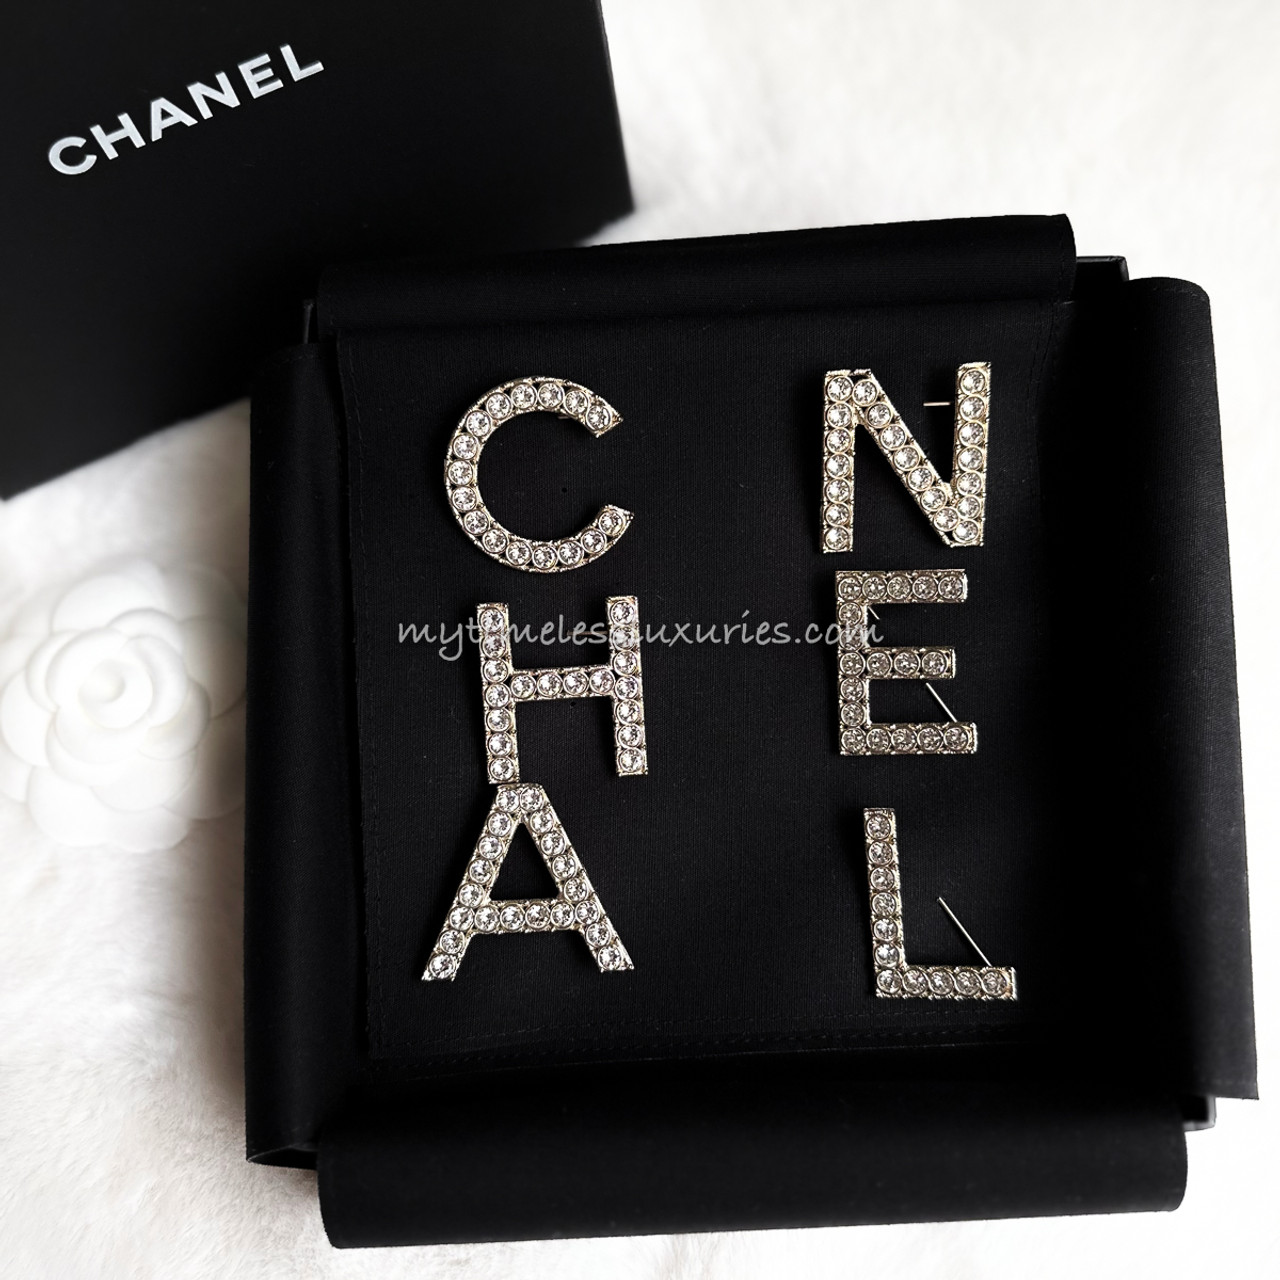 Chanel Earrings Luxury Accessories on Carousell